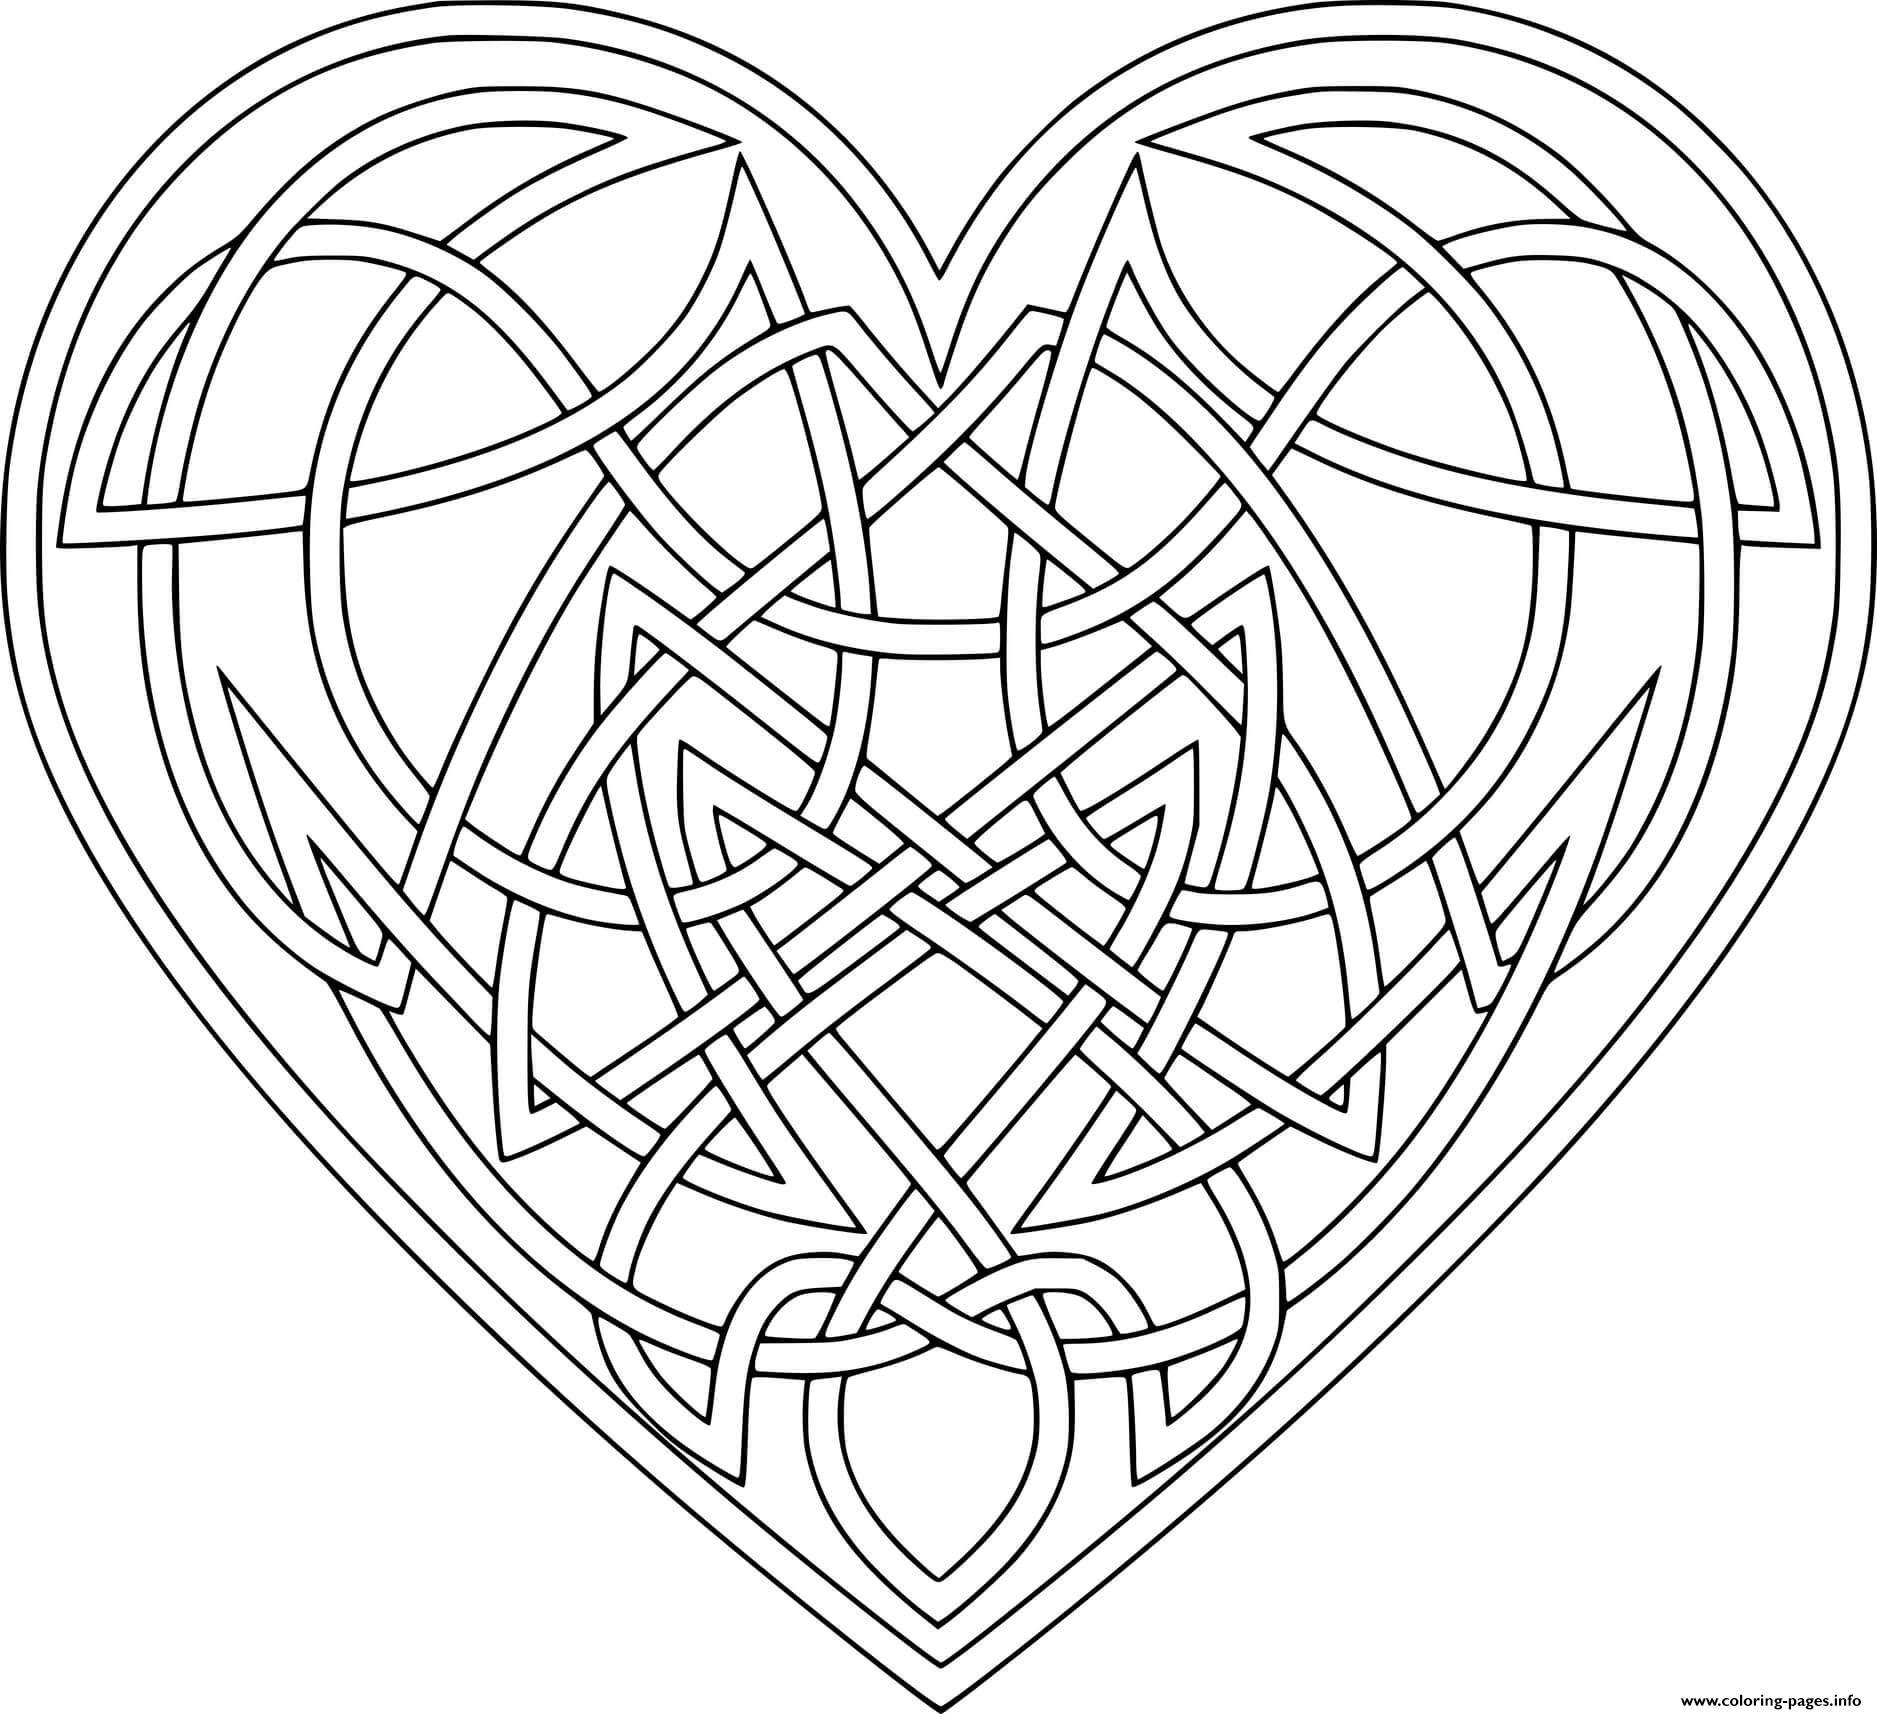 Lines Shaped Heart coloring